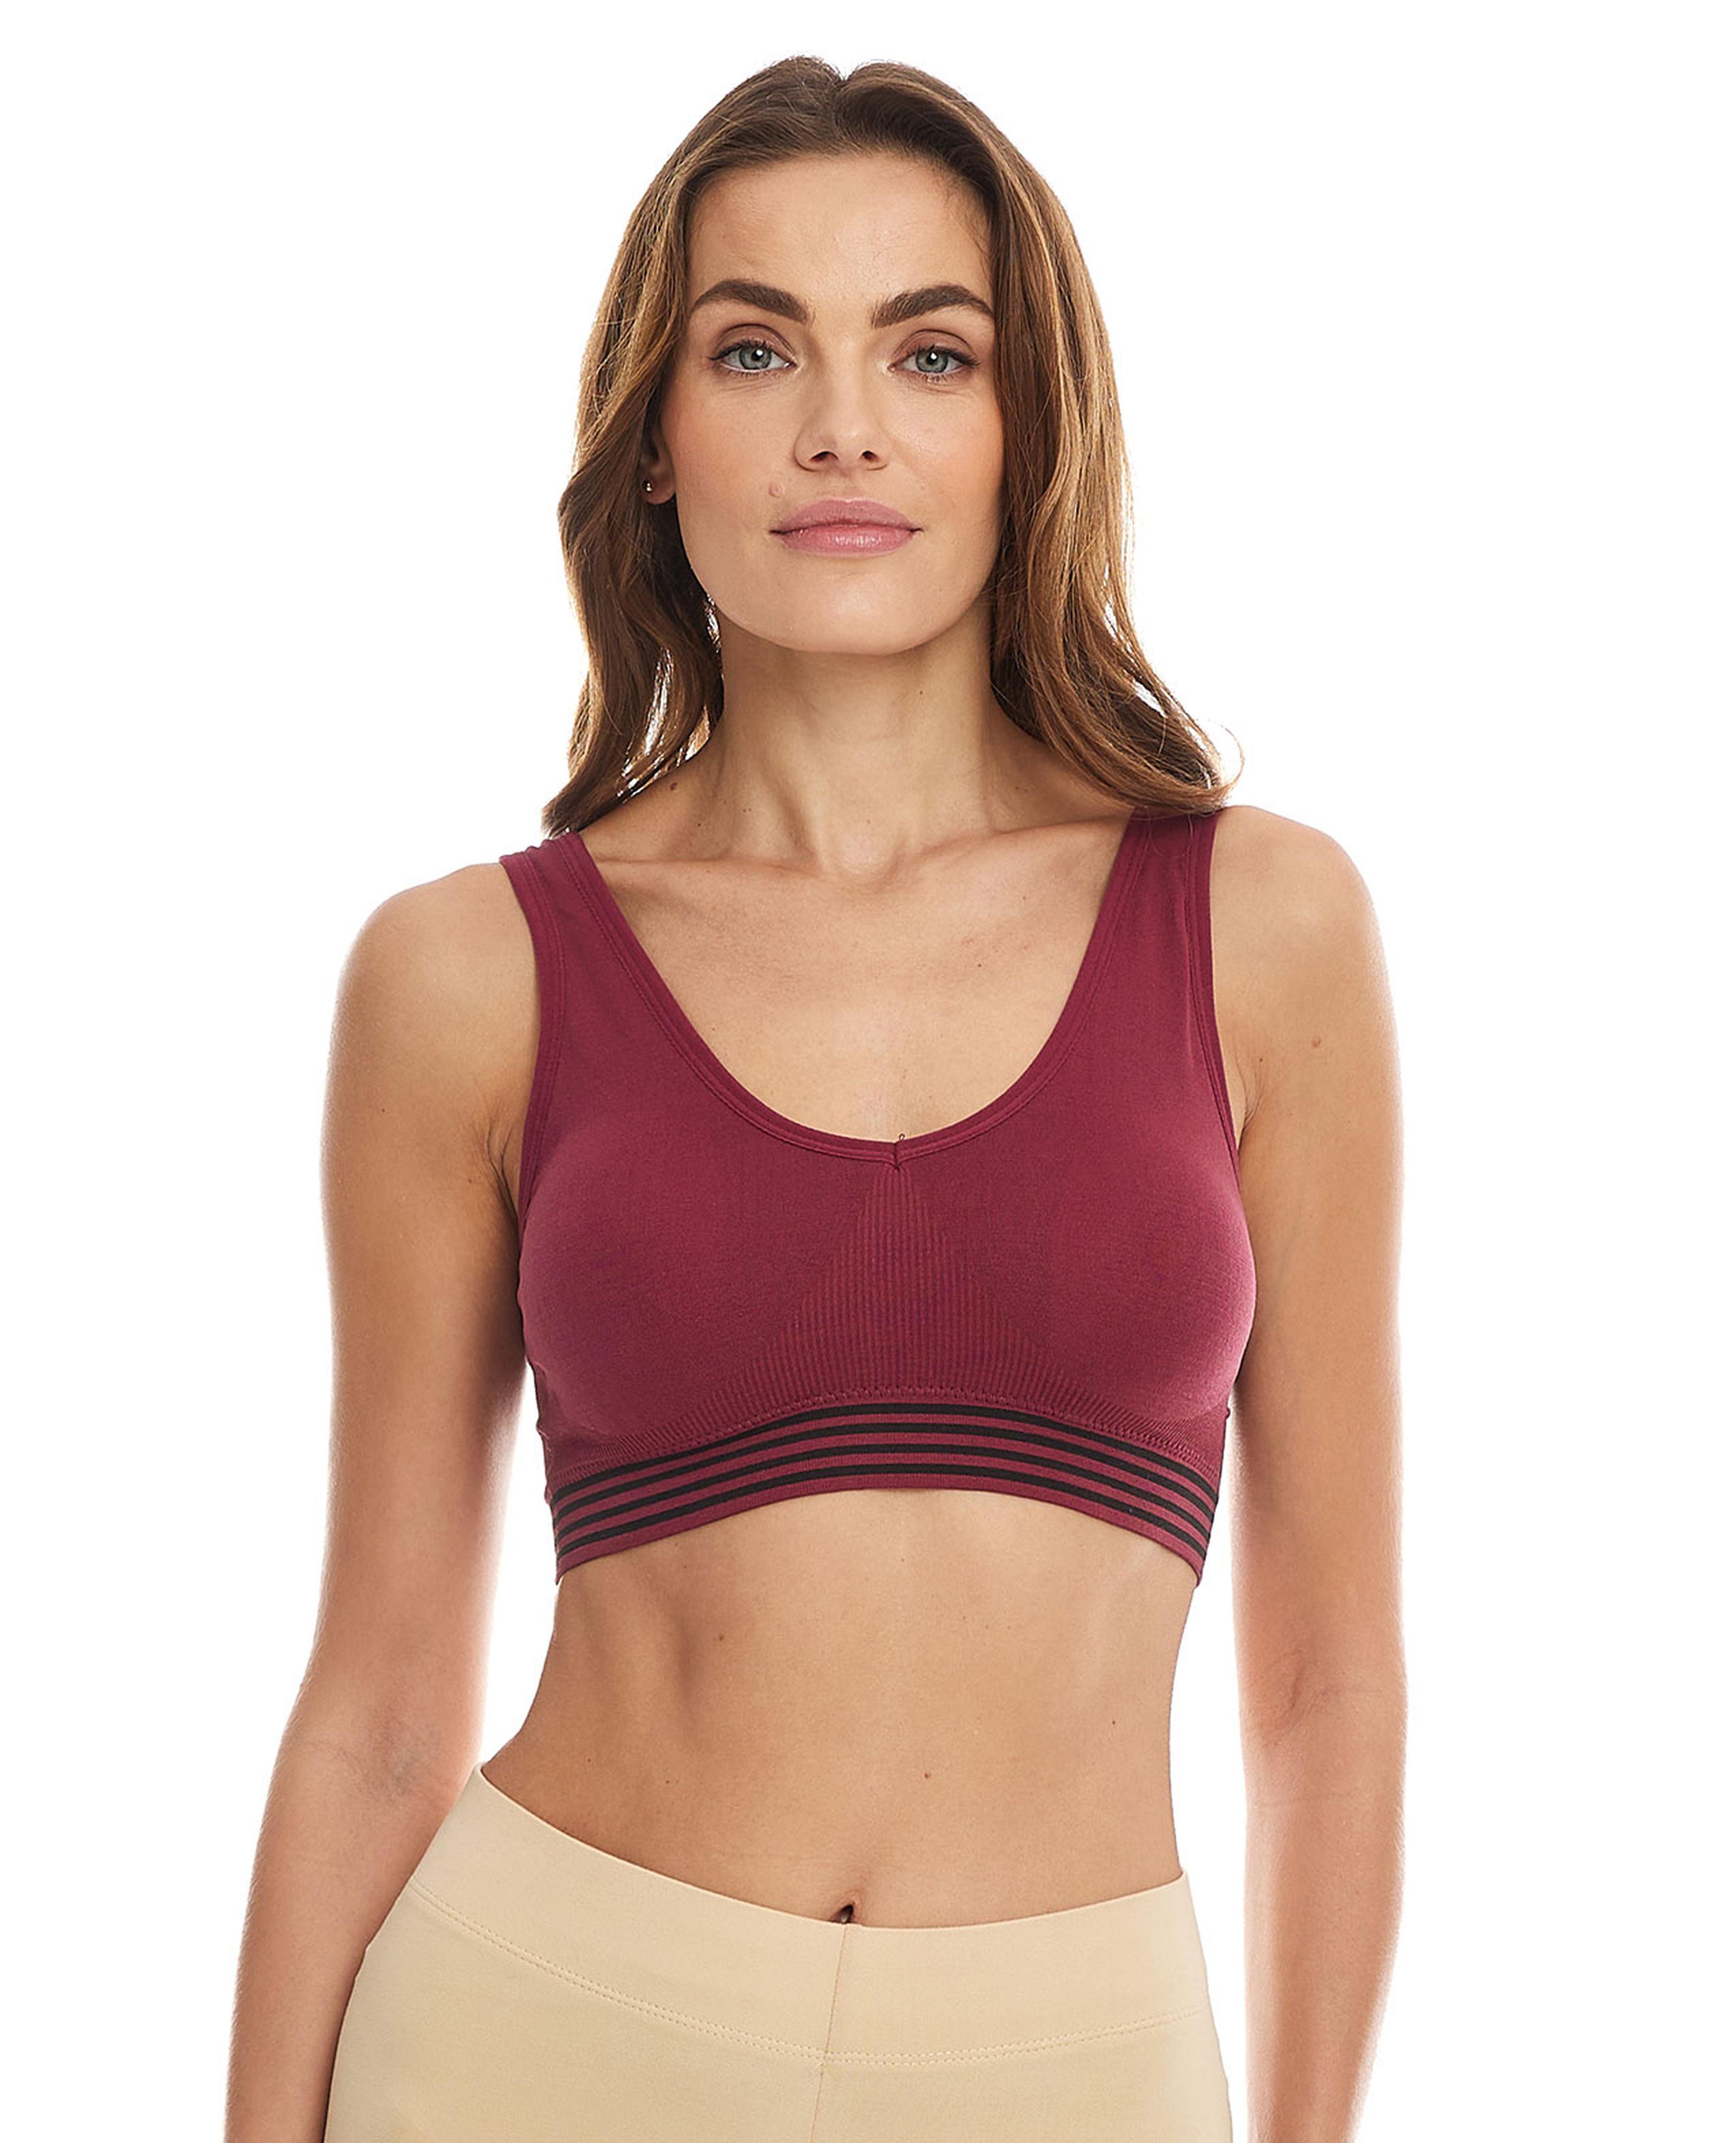 KELYNN Women Anti-Sagging Cotton Sports Bra with Padded for Fitness Yoga  Sports Support Bra New Upgrade US Size, Beige, XXL price in UAE,   UAE